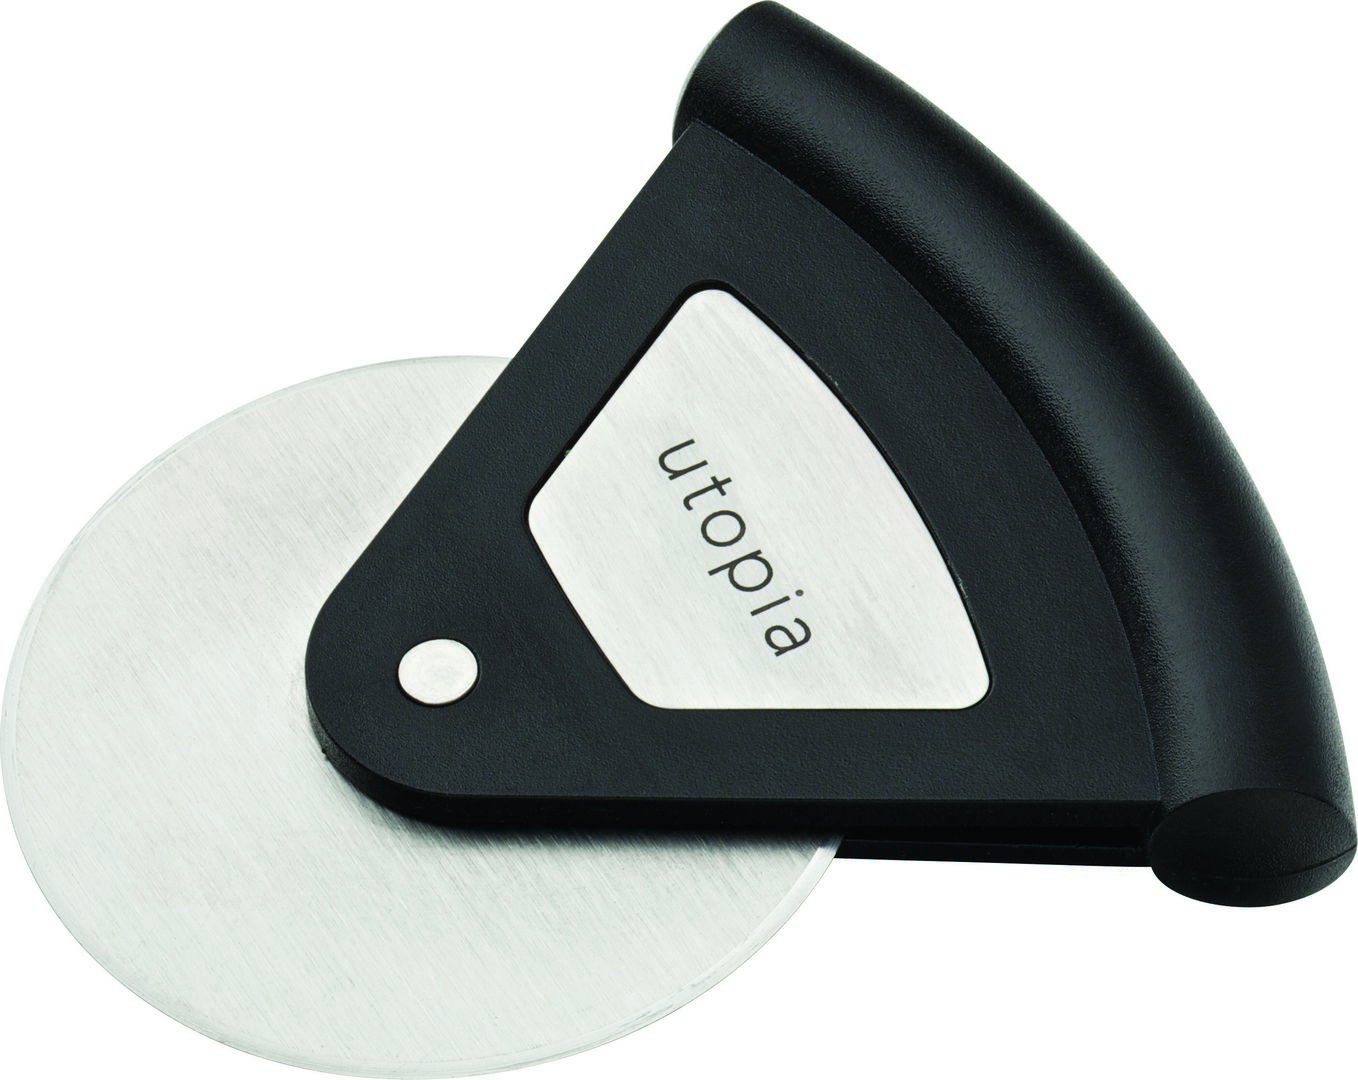 Handheld Pizza Cutter - F91075-000000-B01012 (Pack of 12)